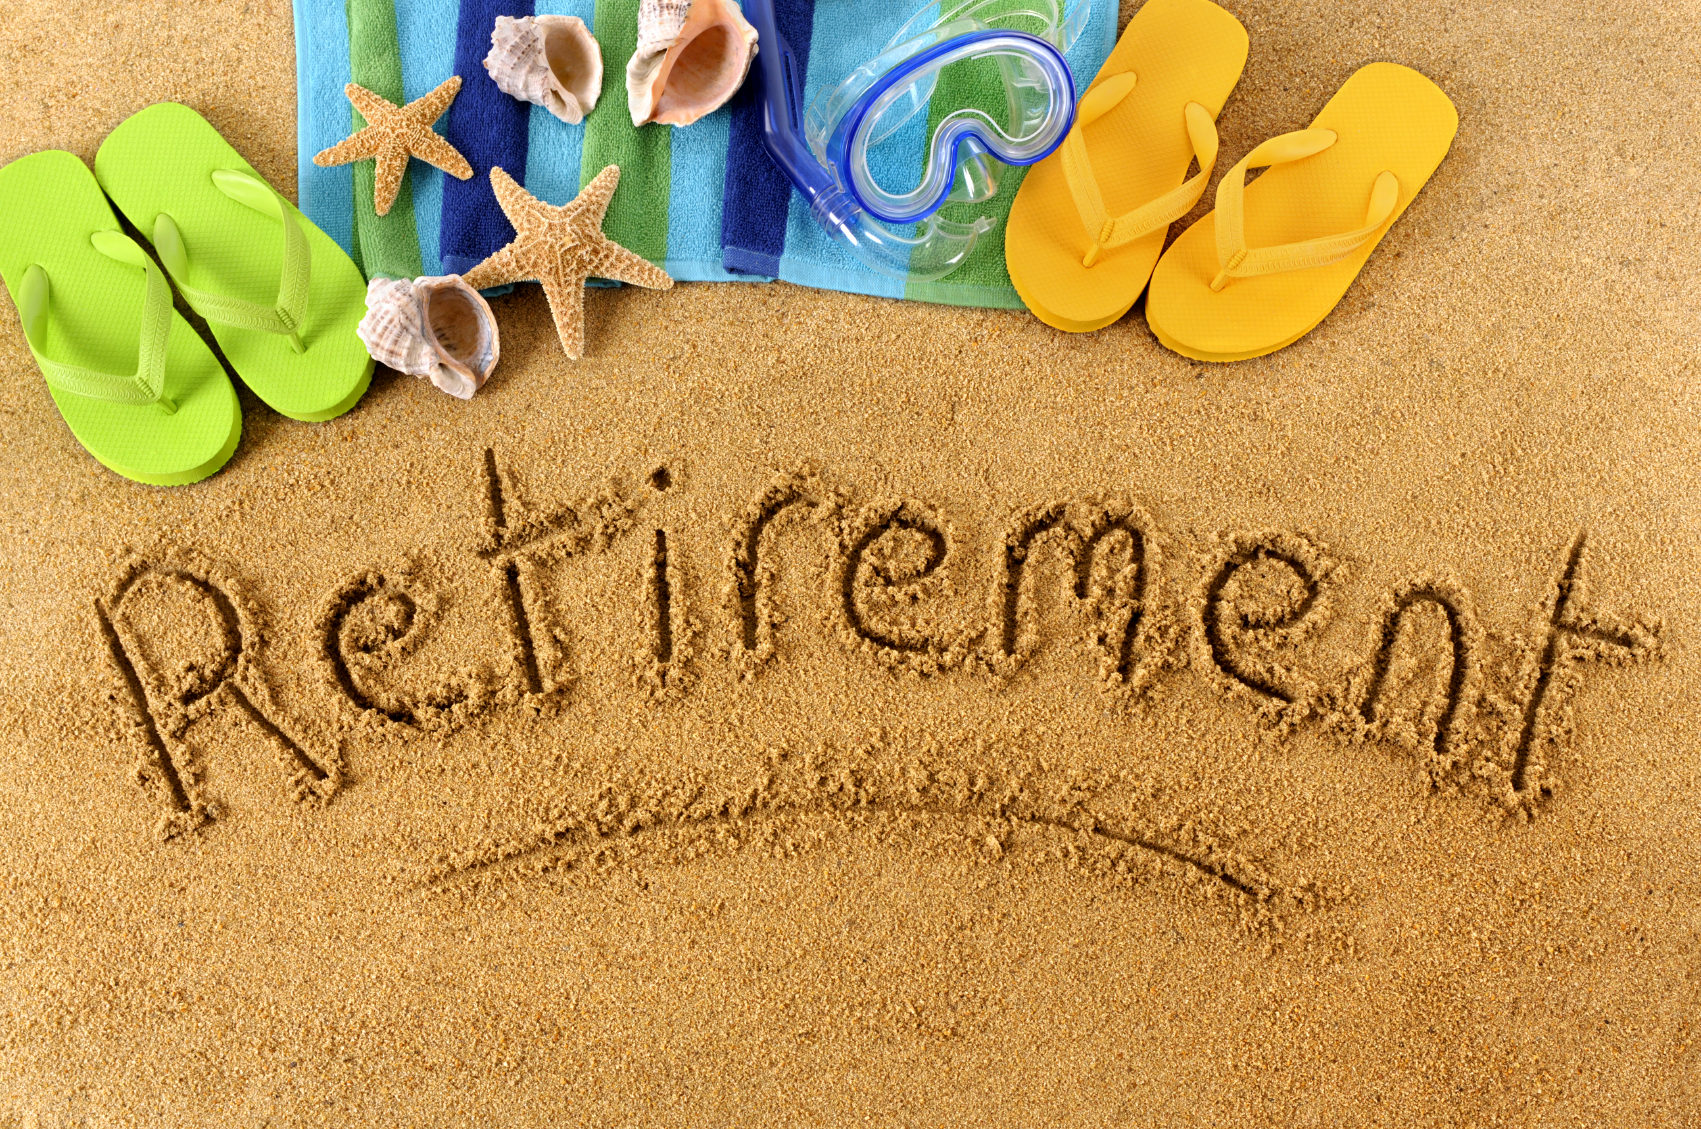 Congratulations, you've finally reached retirement now what?